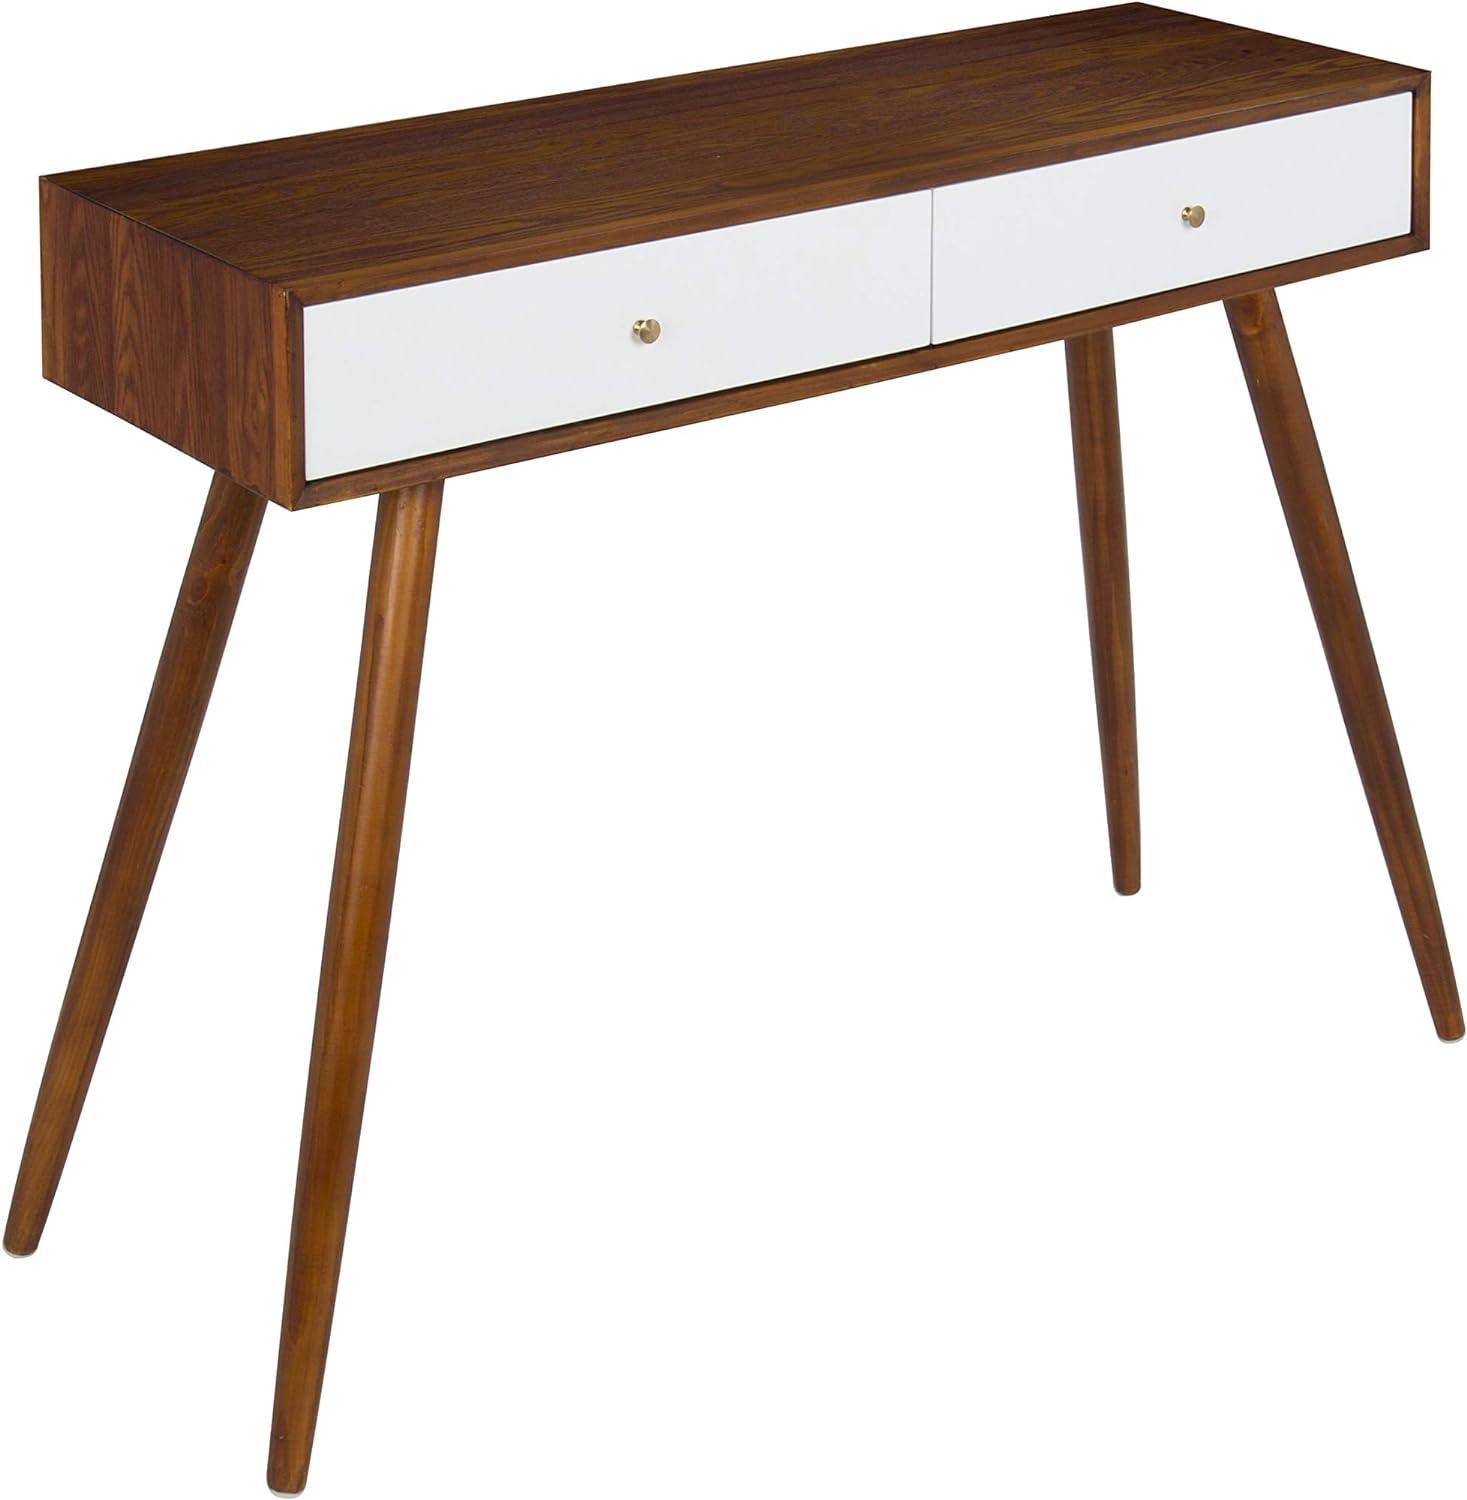 Midcentury Modern Walnut and White Console Table with Brass Accents